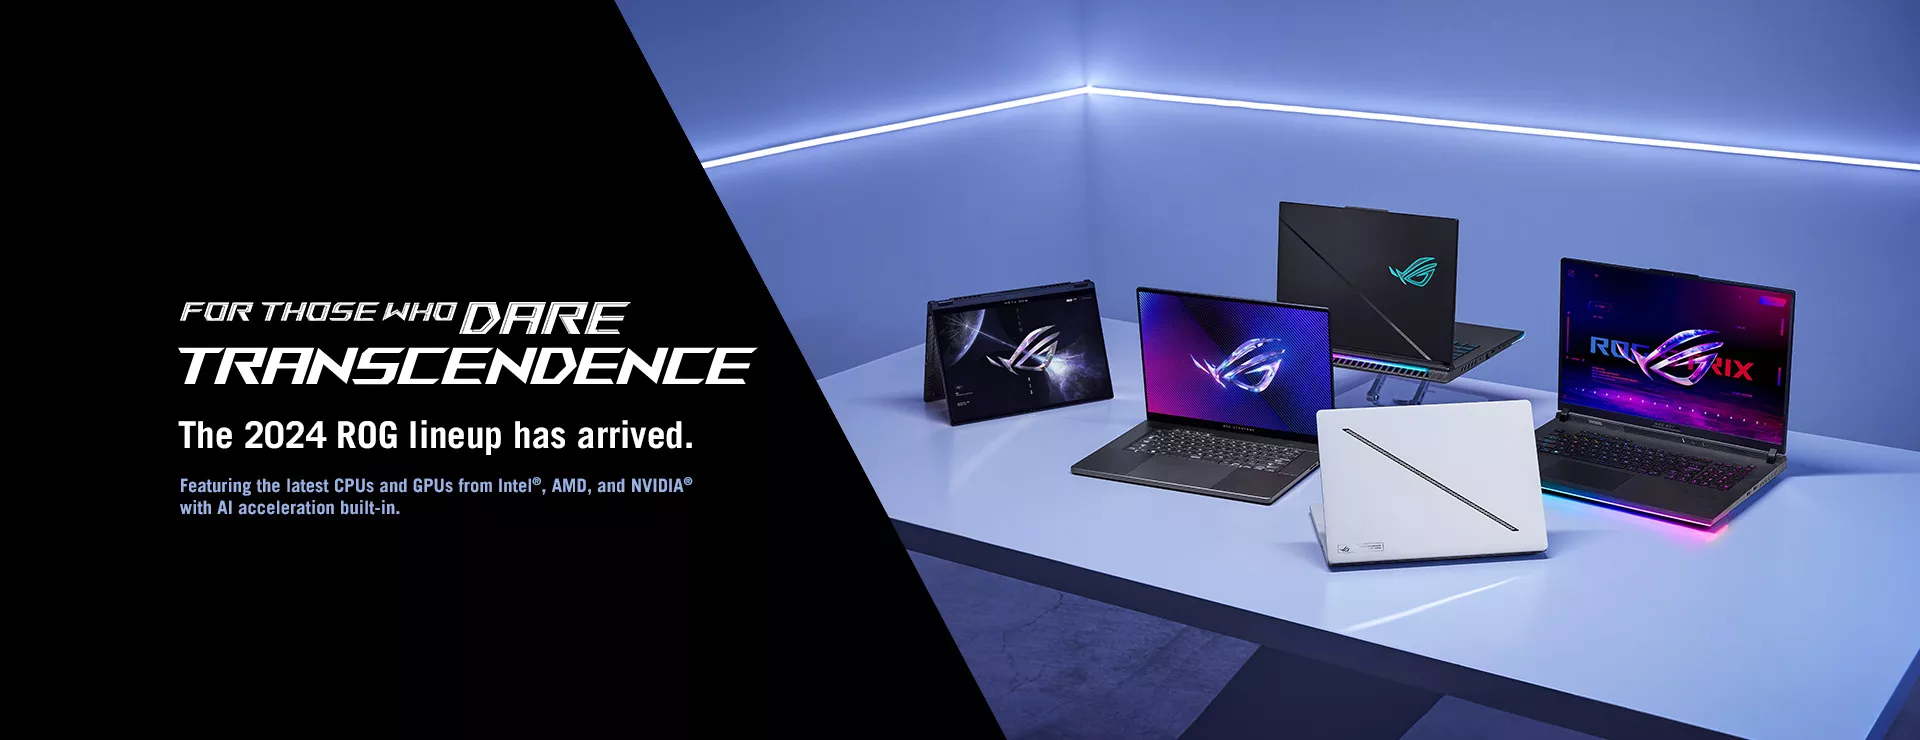 2024 rog laptop family page